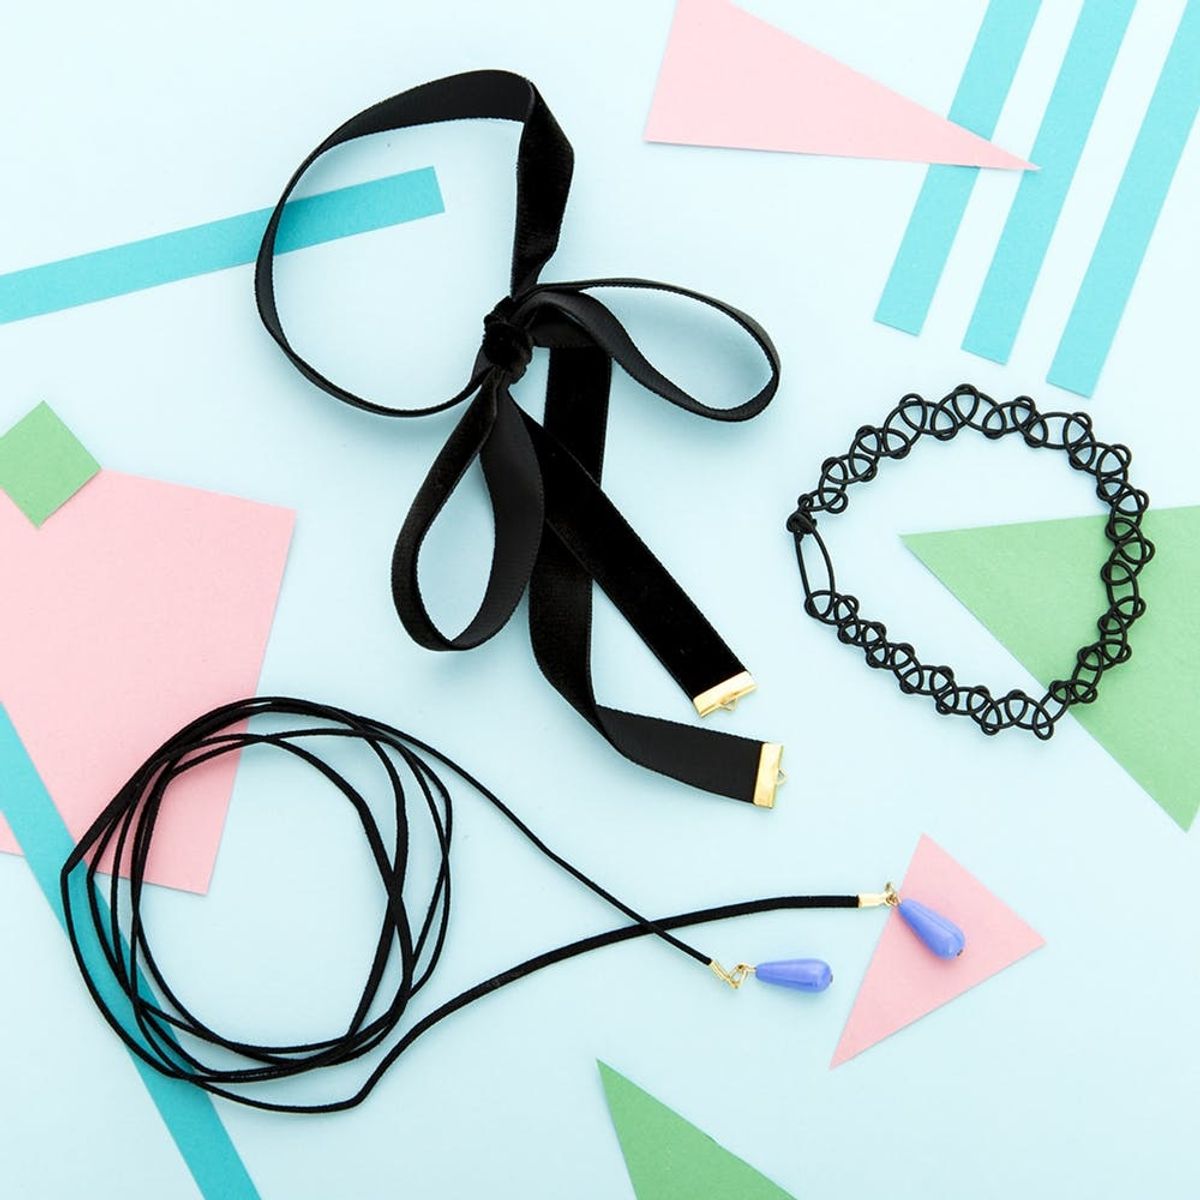 Forget Flower Crowns! Here’s How to DIY a Choker